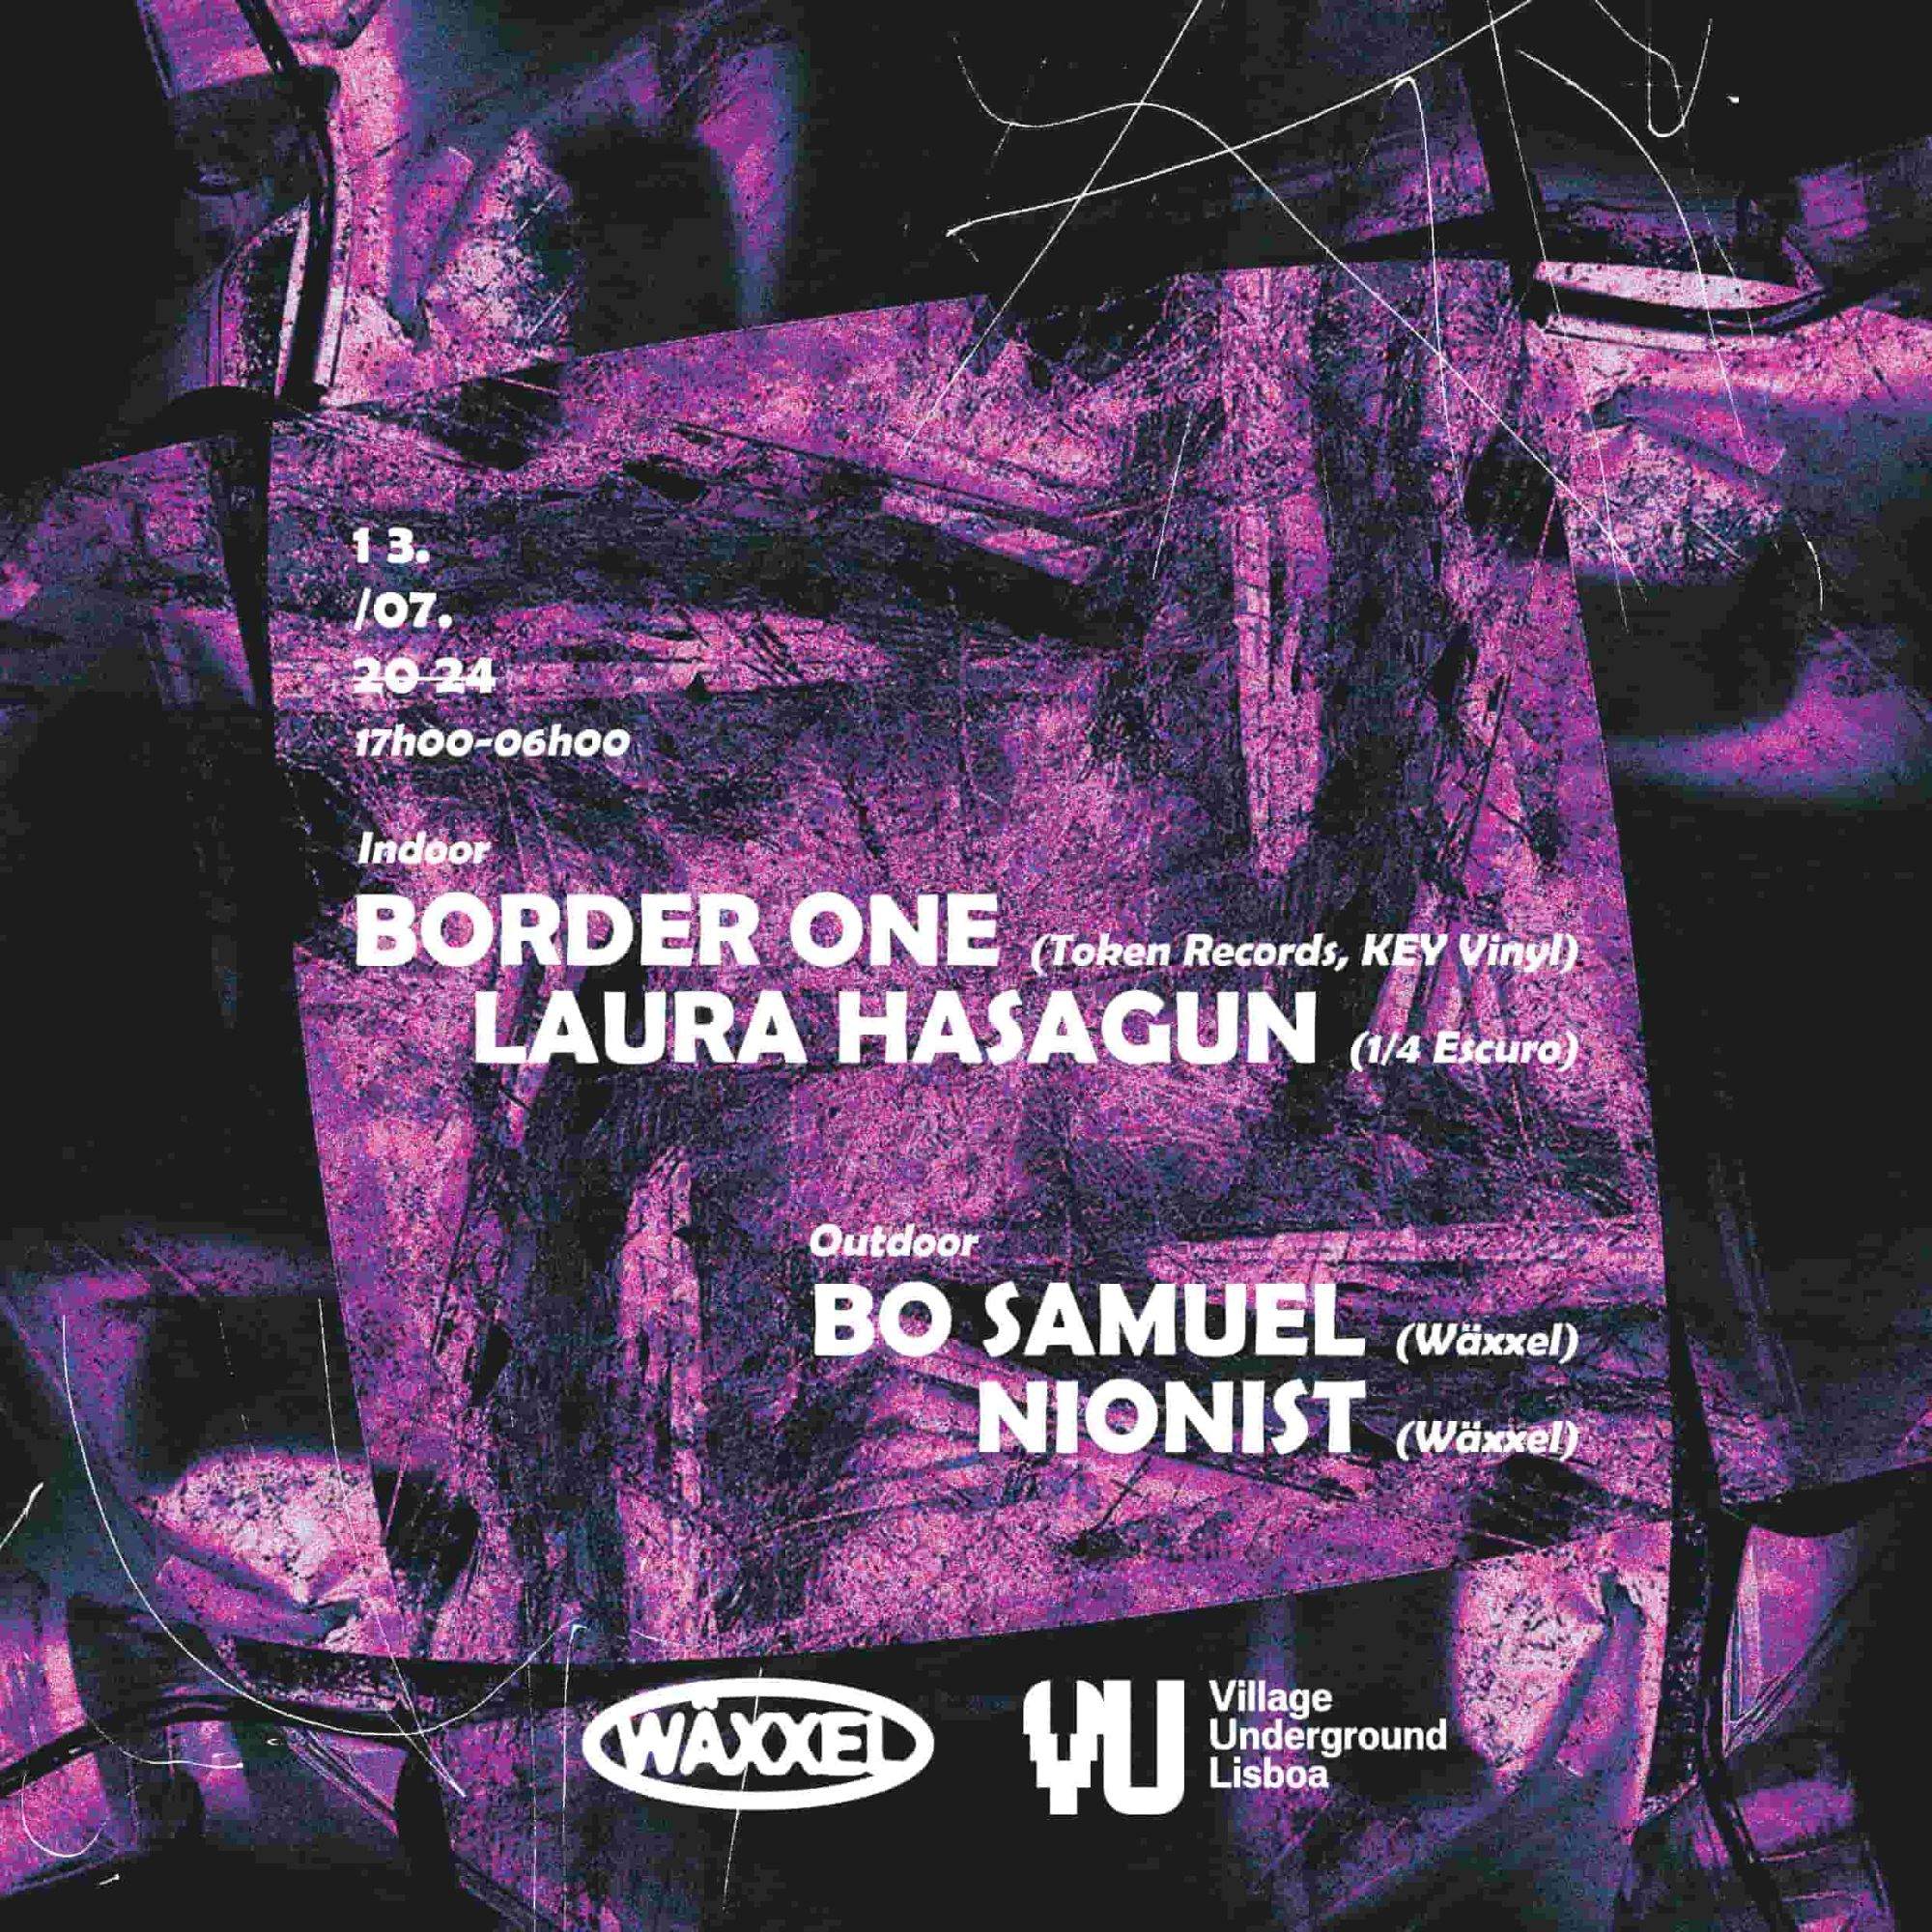 Wäxxel Day & Night with Border One & Laura Hasagun - Página frontal